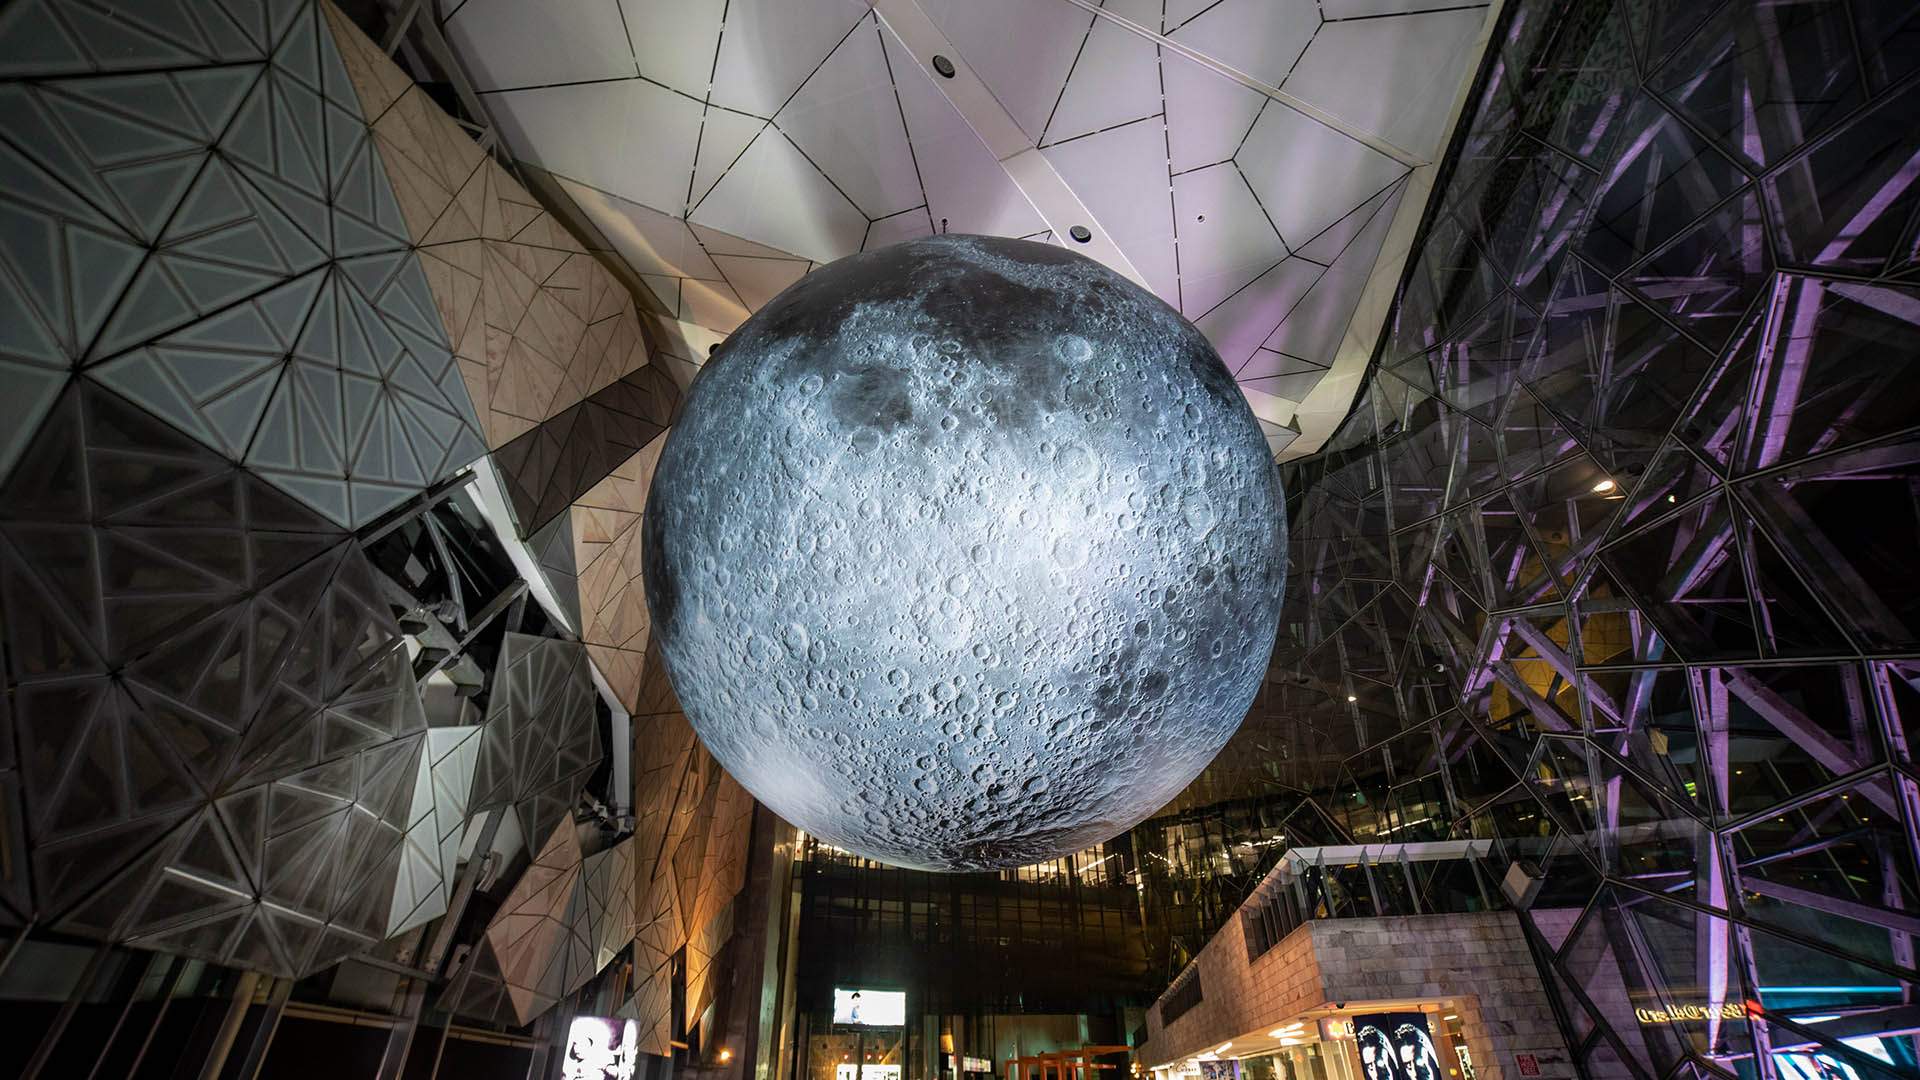 A Giant Sculpture of the Moon Has Popped Up in Melbourne to Celebrate Marvel's 'Moon Knight'